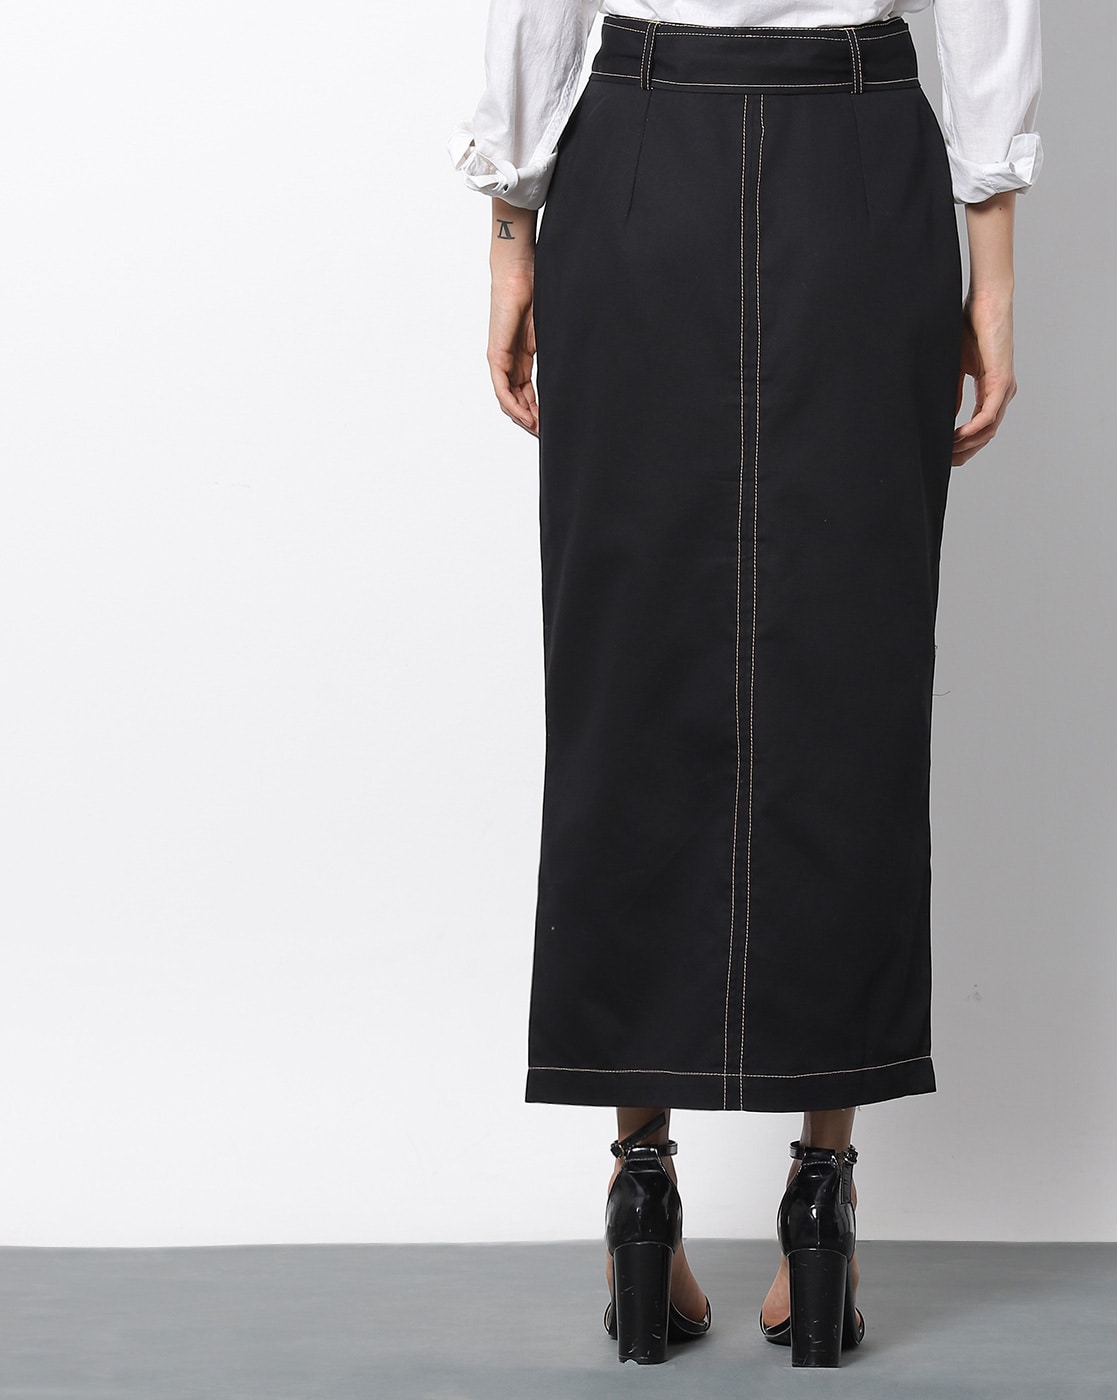 Buy Black Skirts for Women by Outryt Online